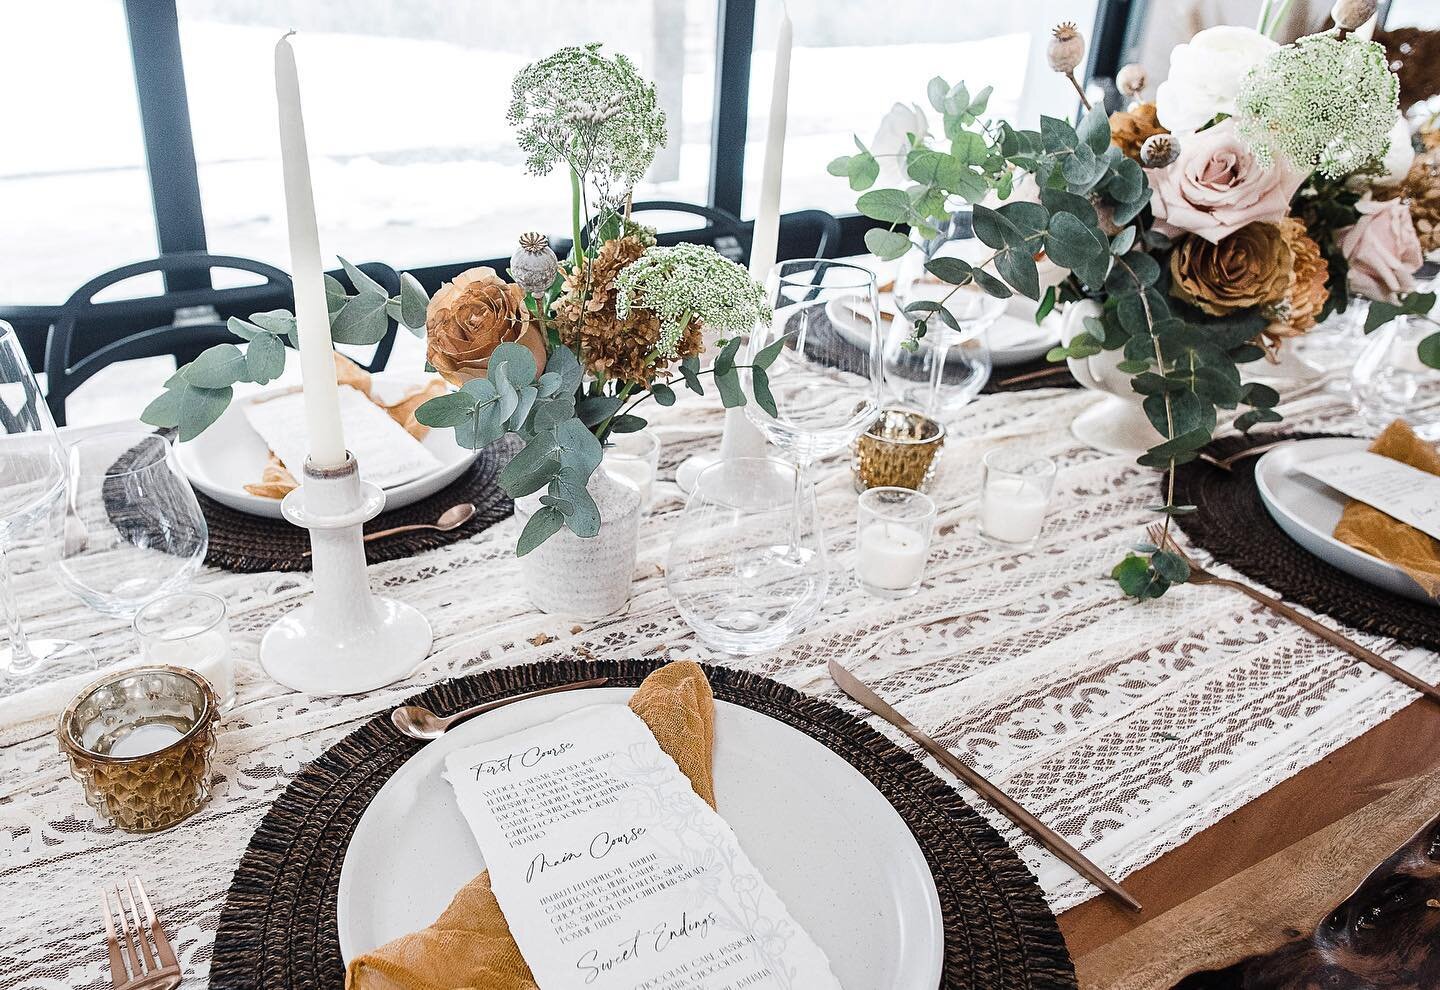 I&rsquo;m taking this opportunity while we are STILL getting snow in Toronto, to do a callback to when we did this fun styled shoot in the middle of winter at @farmhillweddings! 

Inspired by the peaks and valleys of Patagonia, we mixed textures like